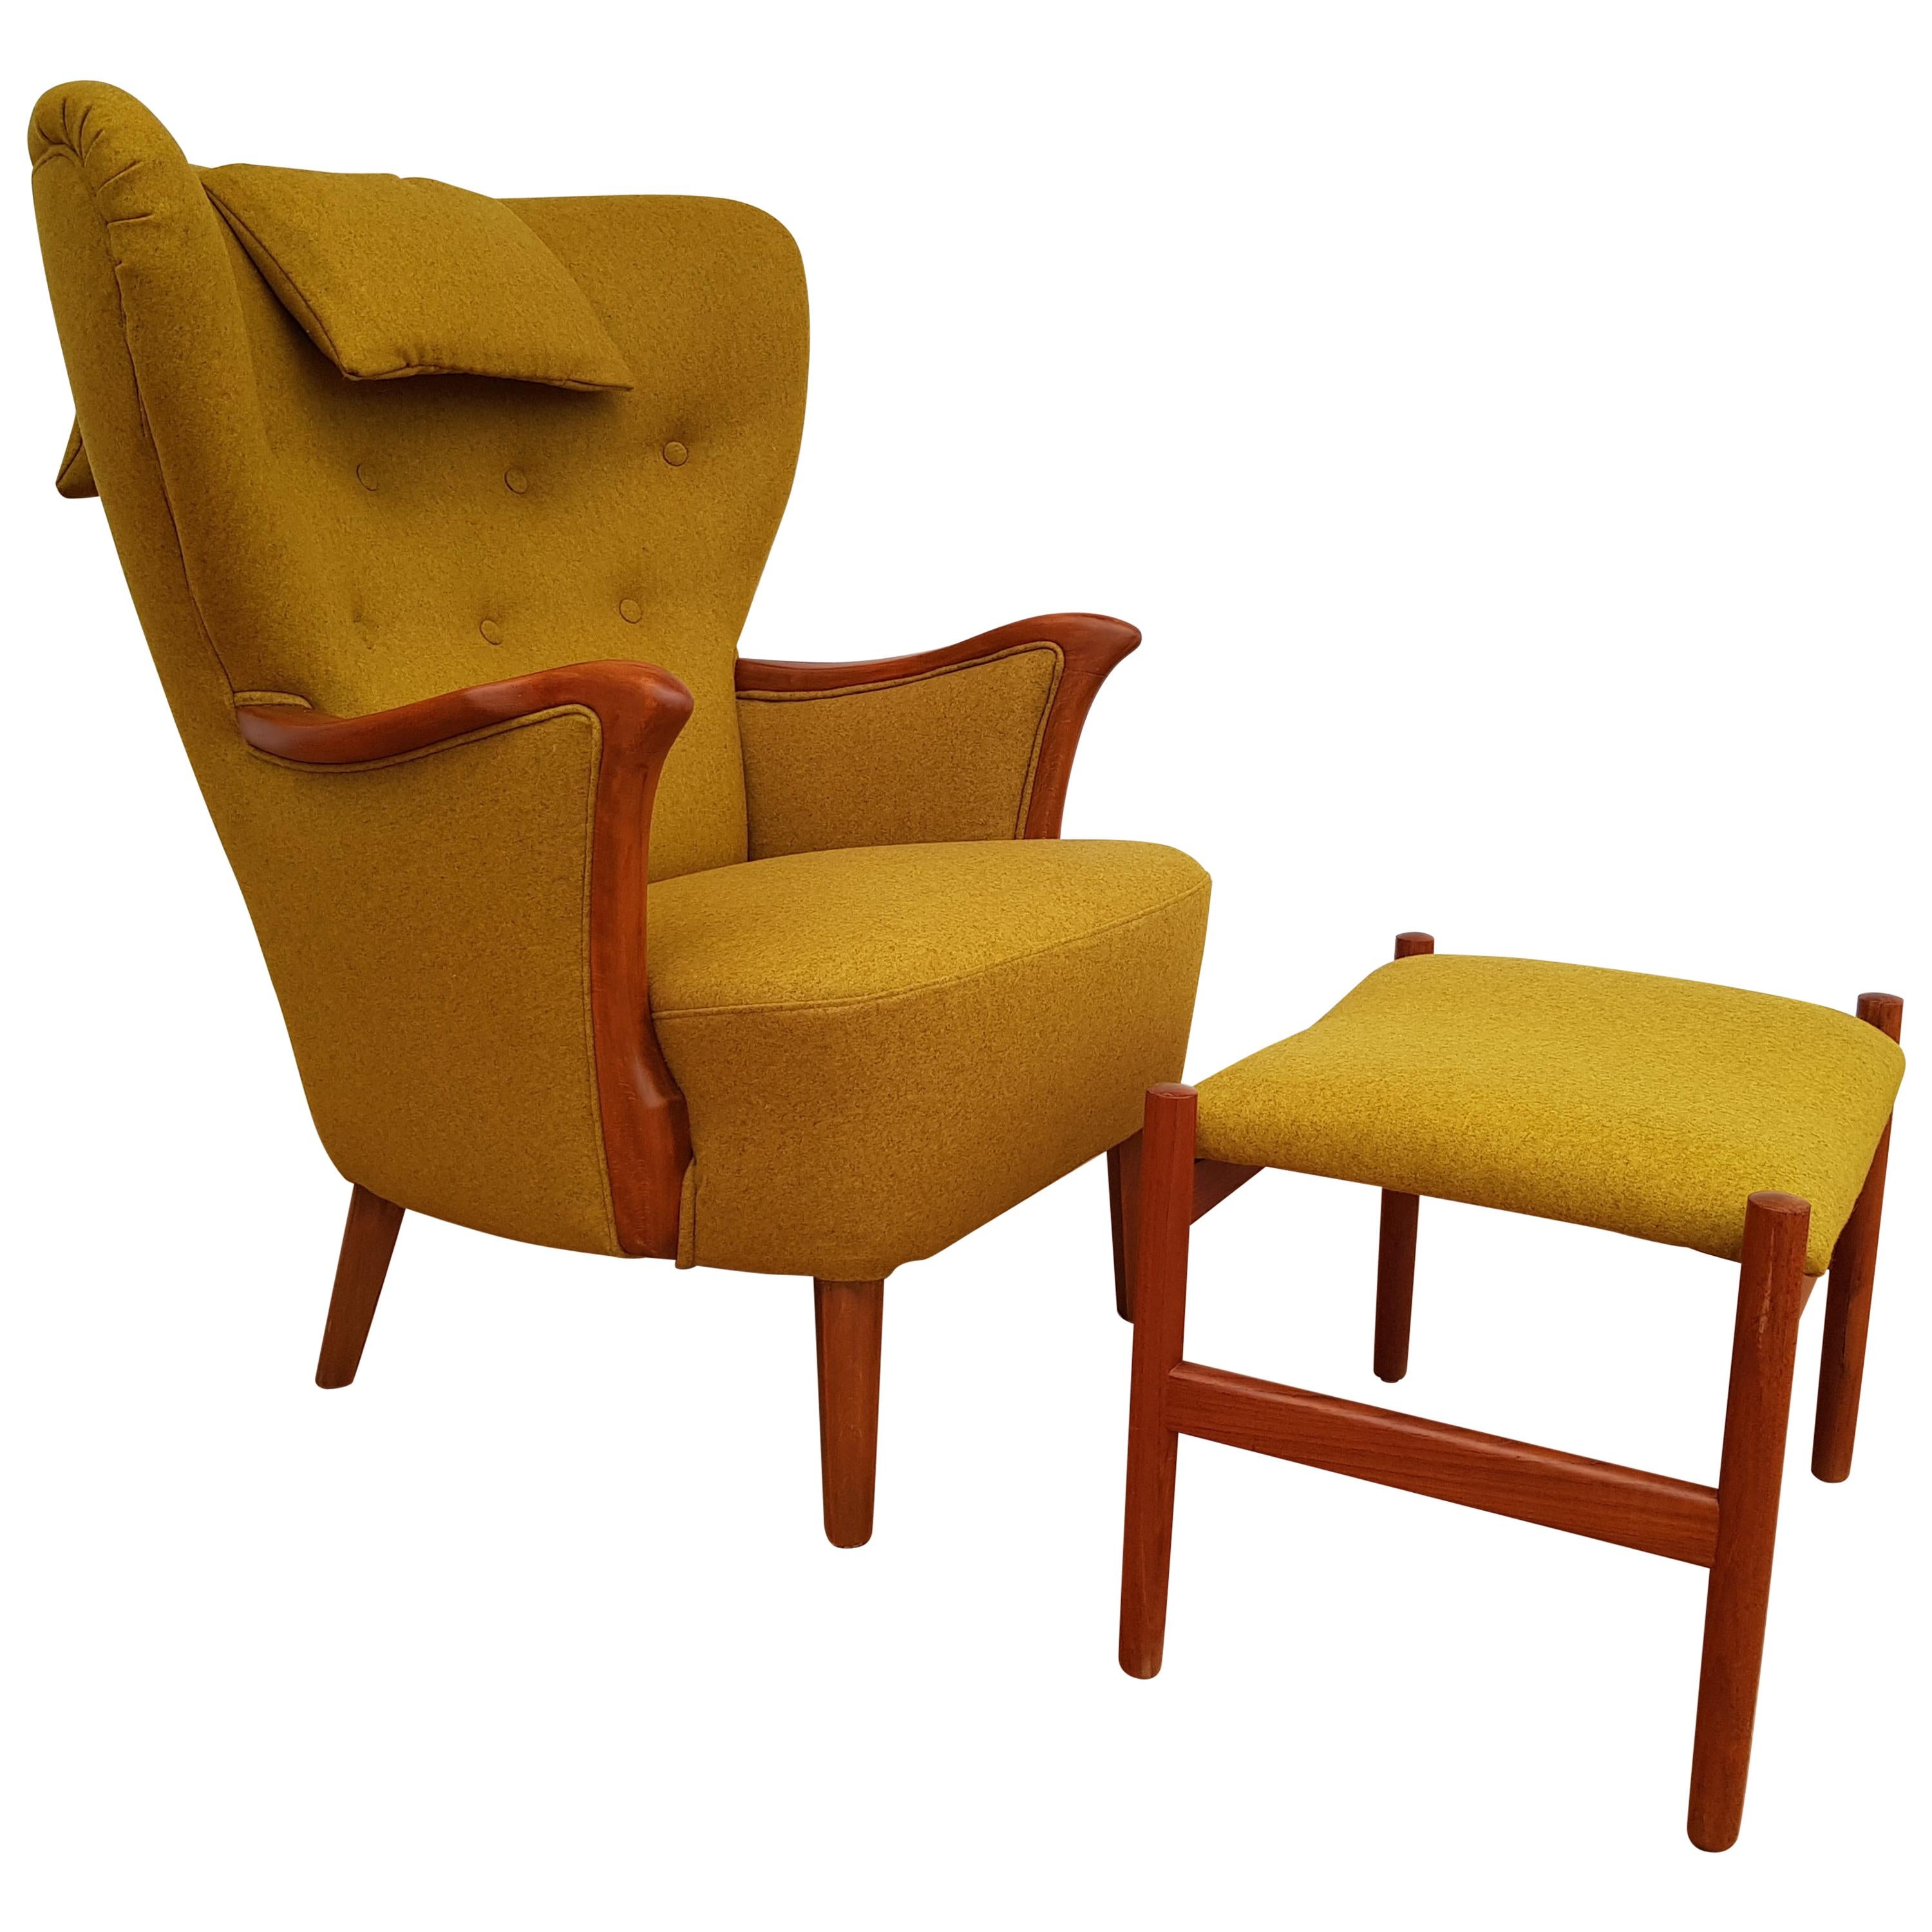 Danish Lounge Chair, 1960s, Wool, Beech, Completely Restored